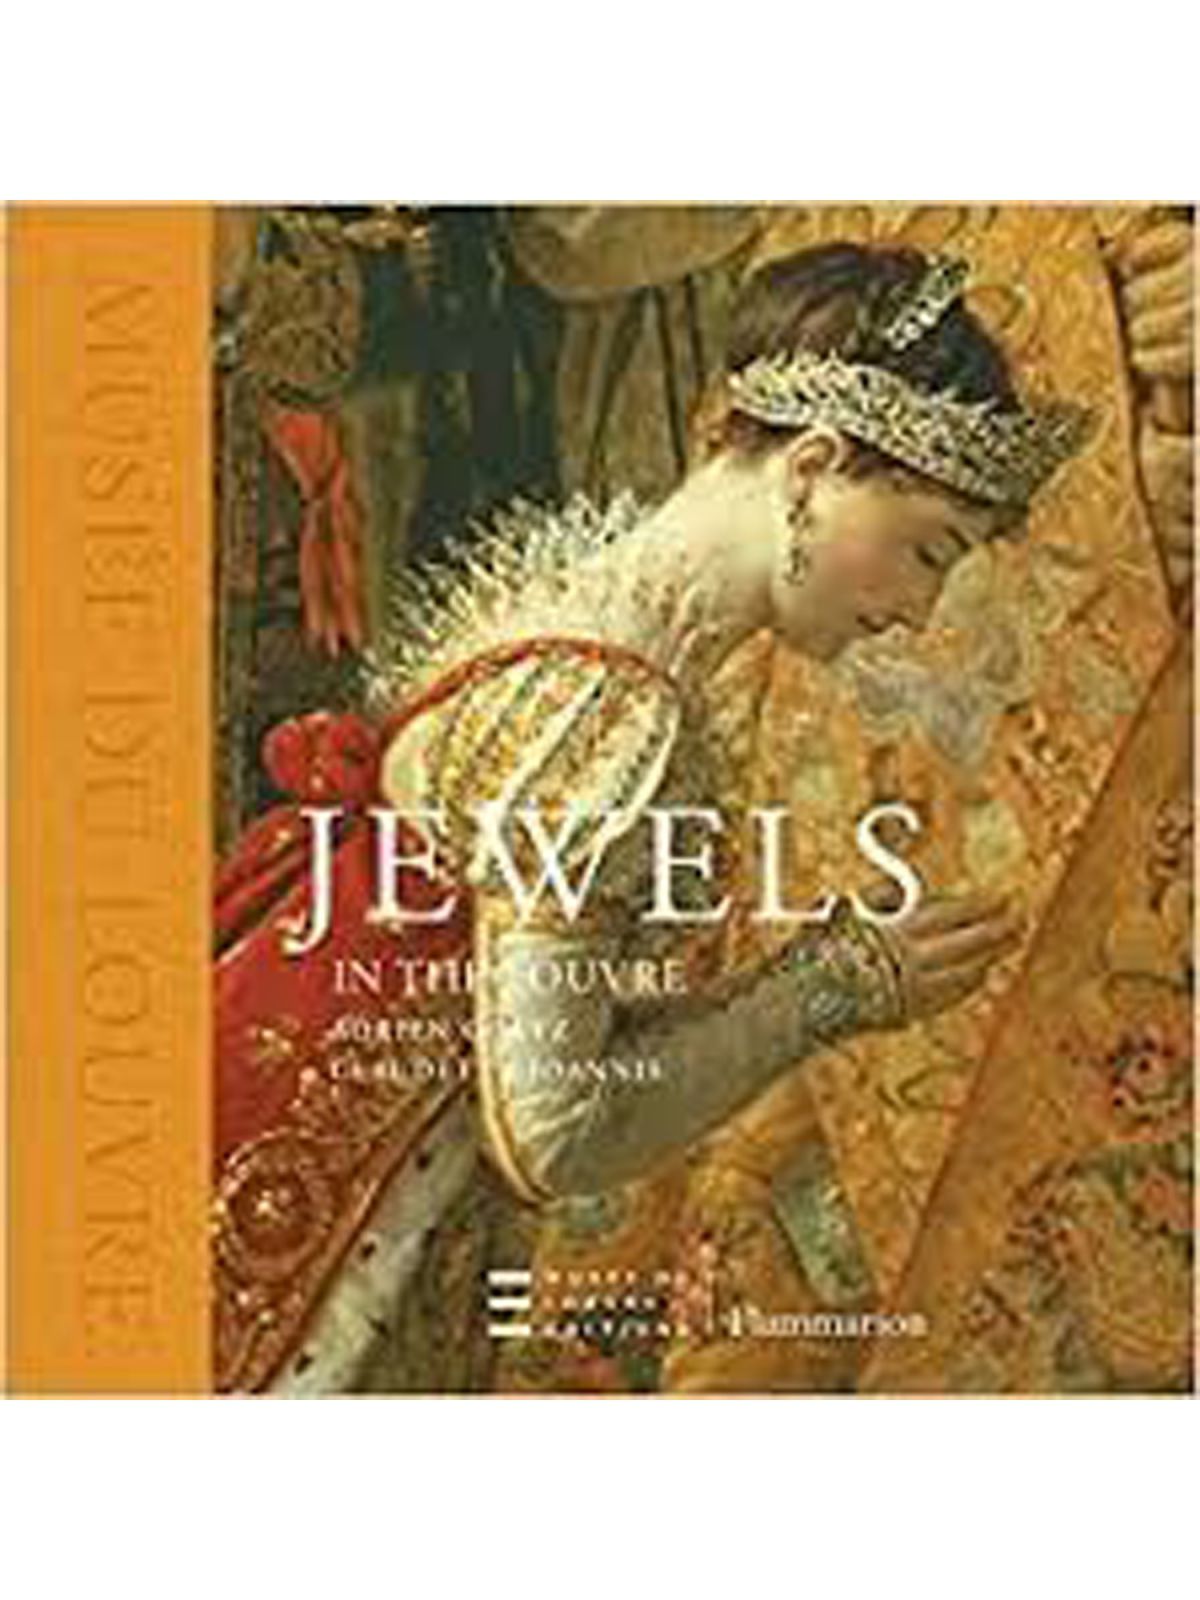 JEWELS IN THE LOUVRE